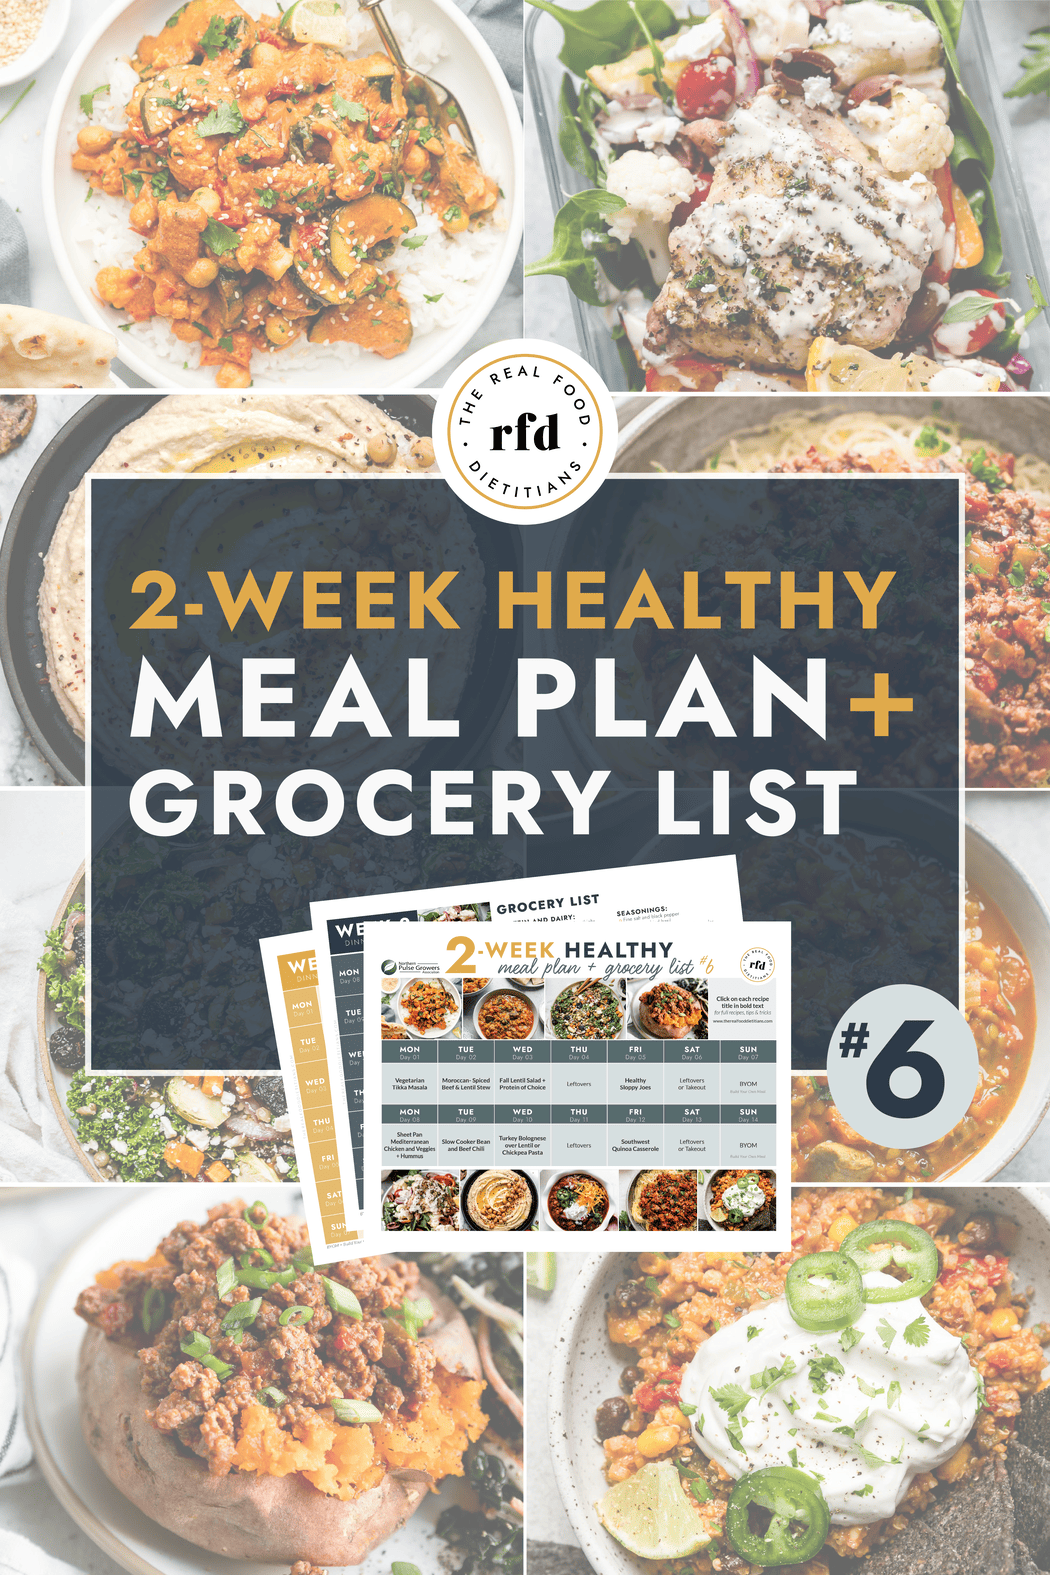 Meal Planning for One - Nourish Nutrition Blog + Meal Planning Recipes